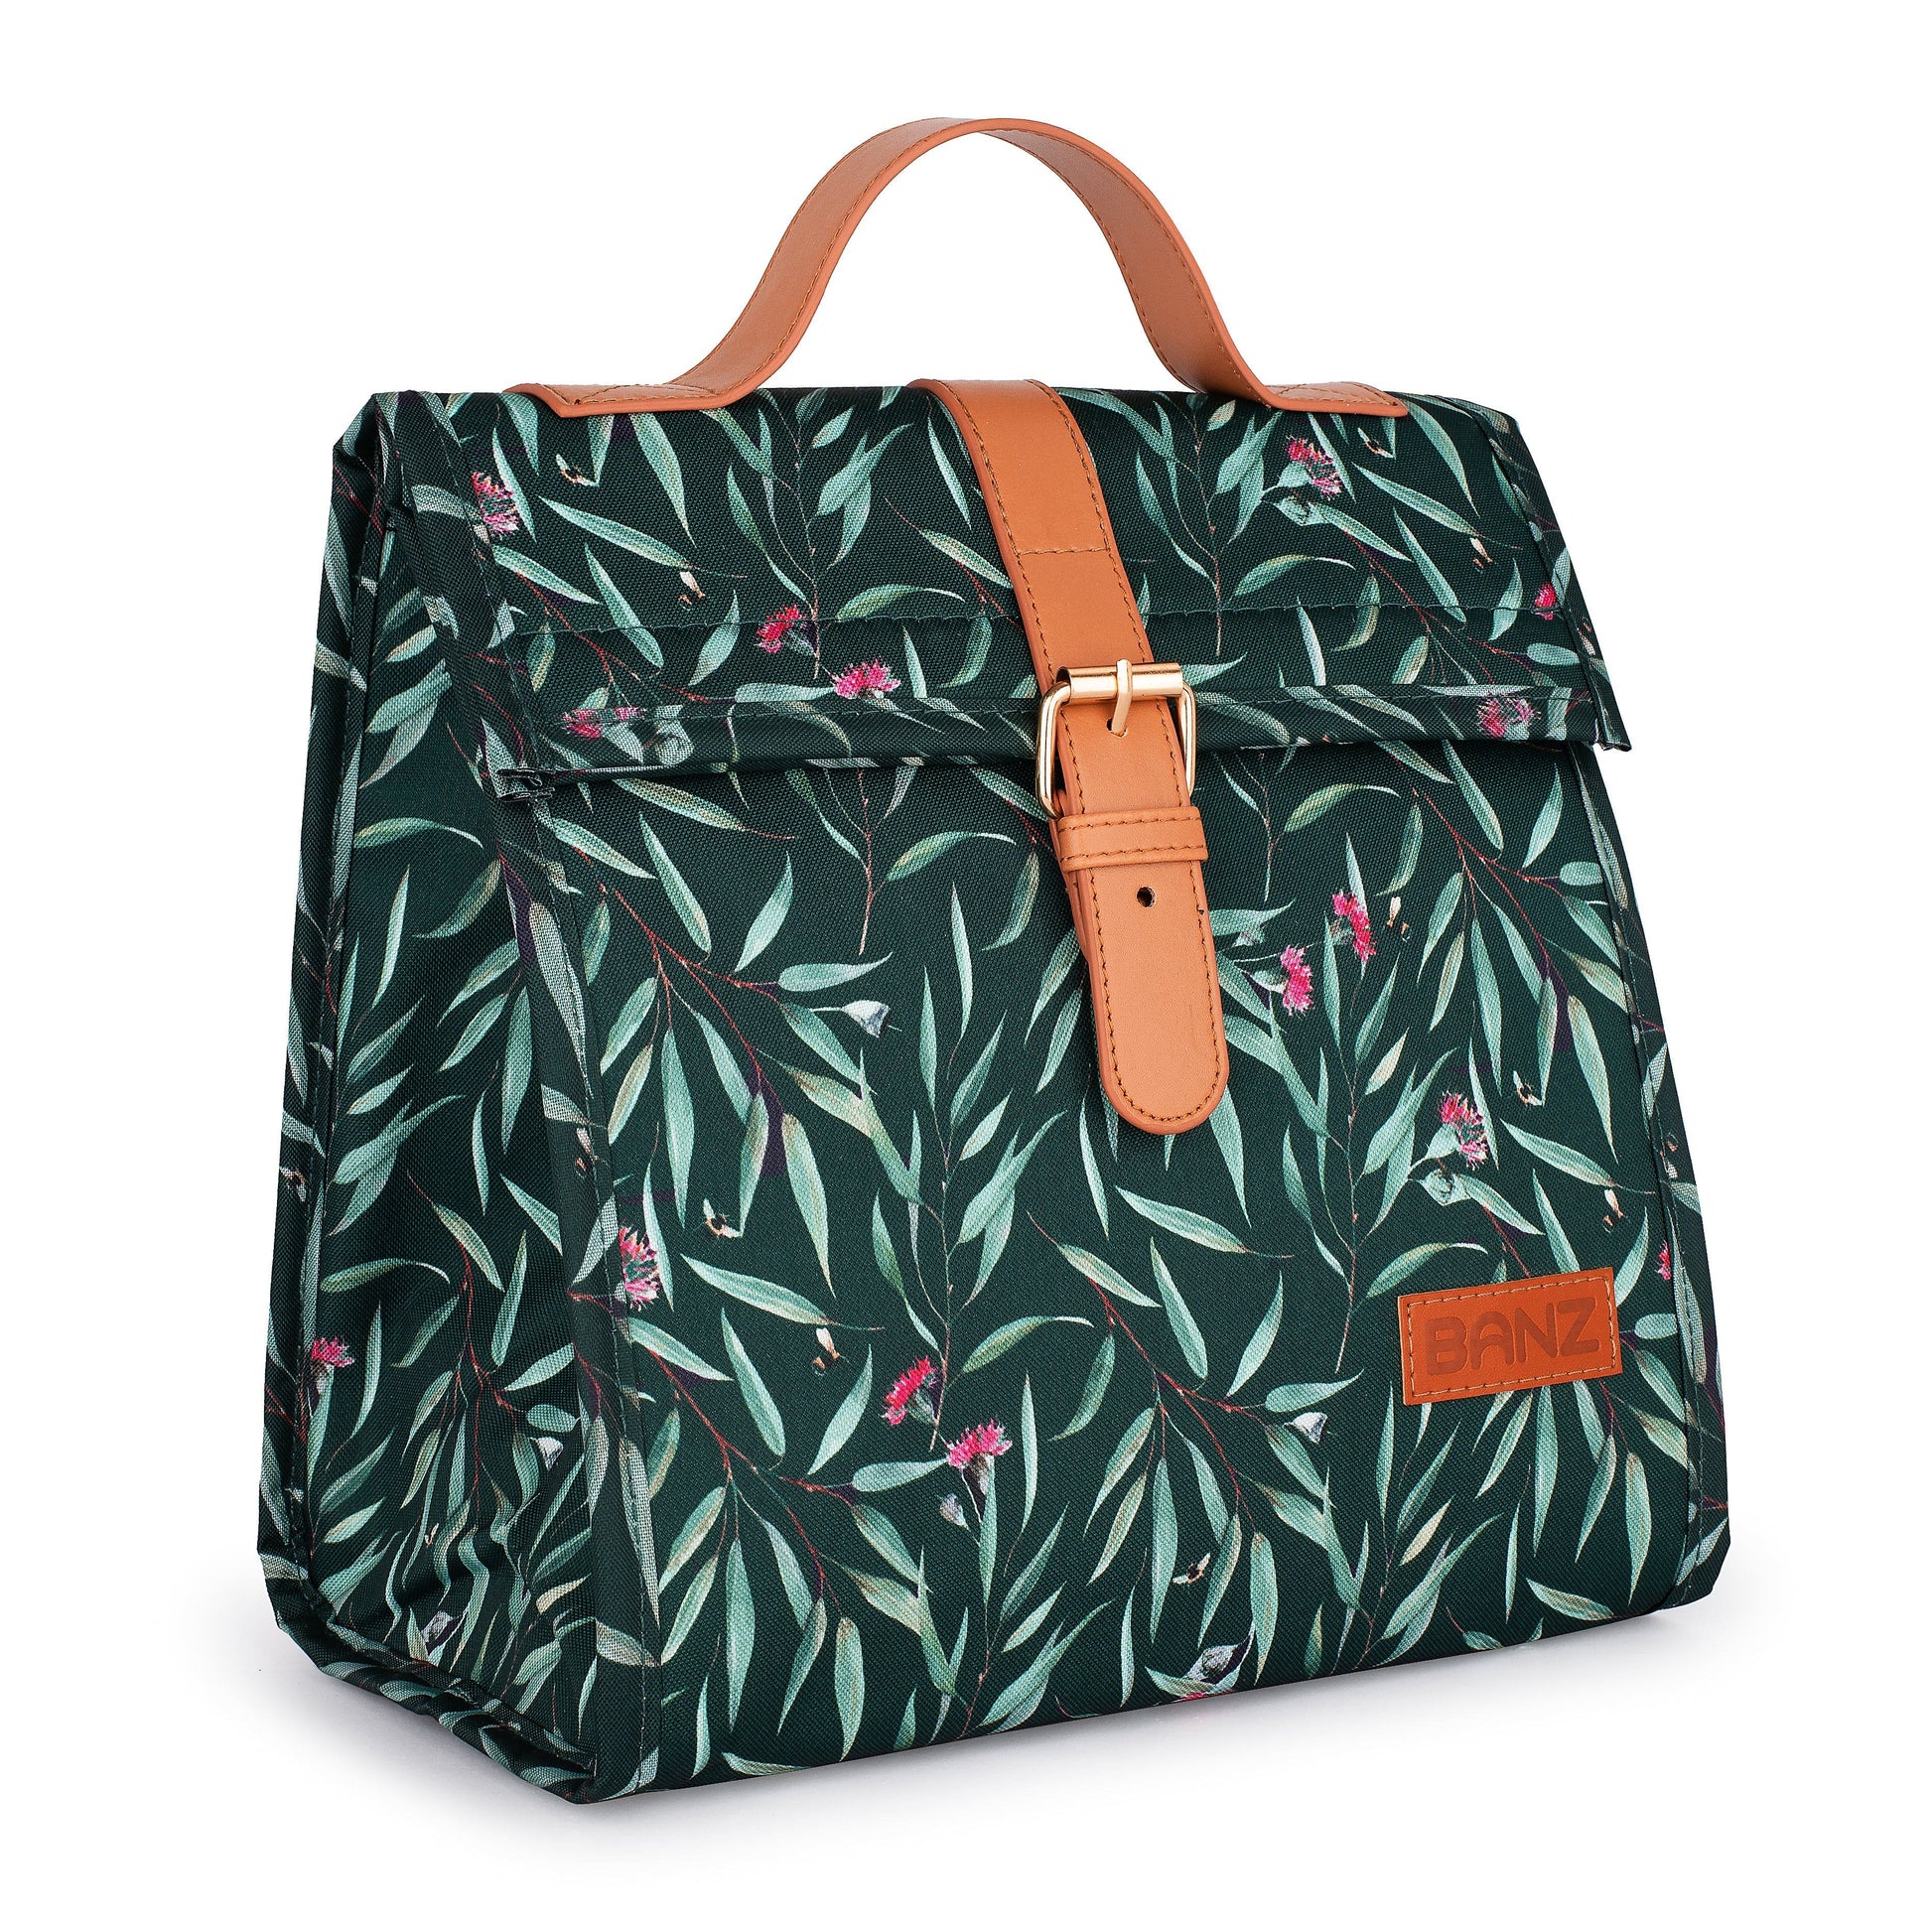 BANZ Coolers Lunch Cooler Bag Gum Leaves Green / Small - 24 x 15x 24 cms